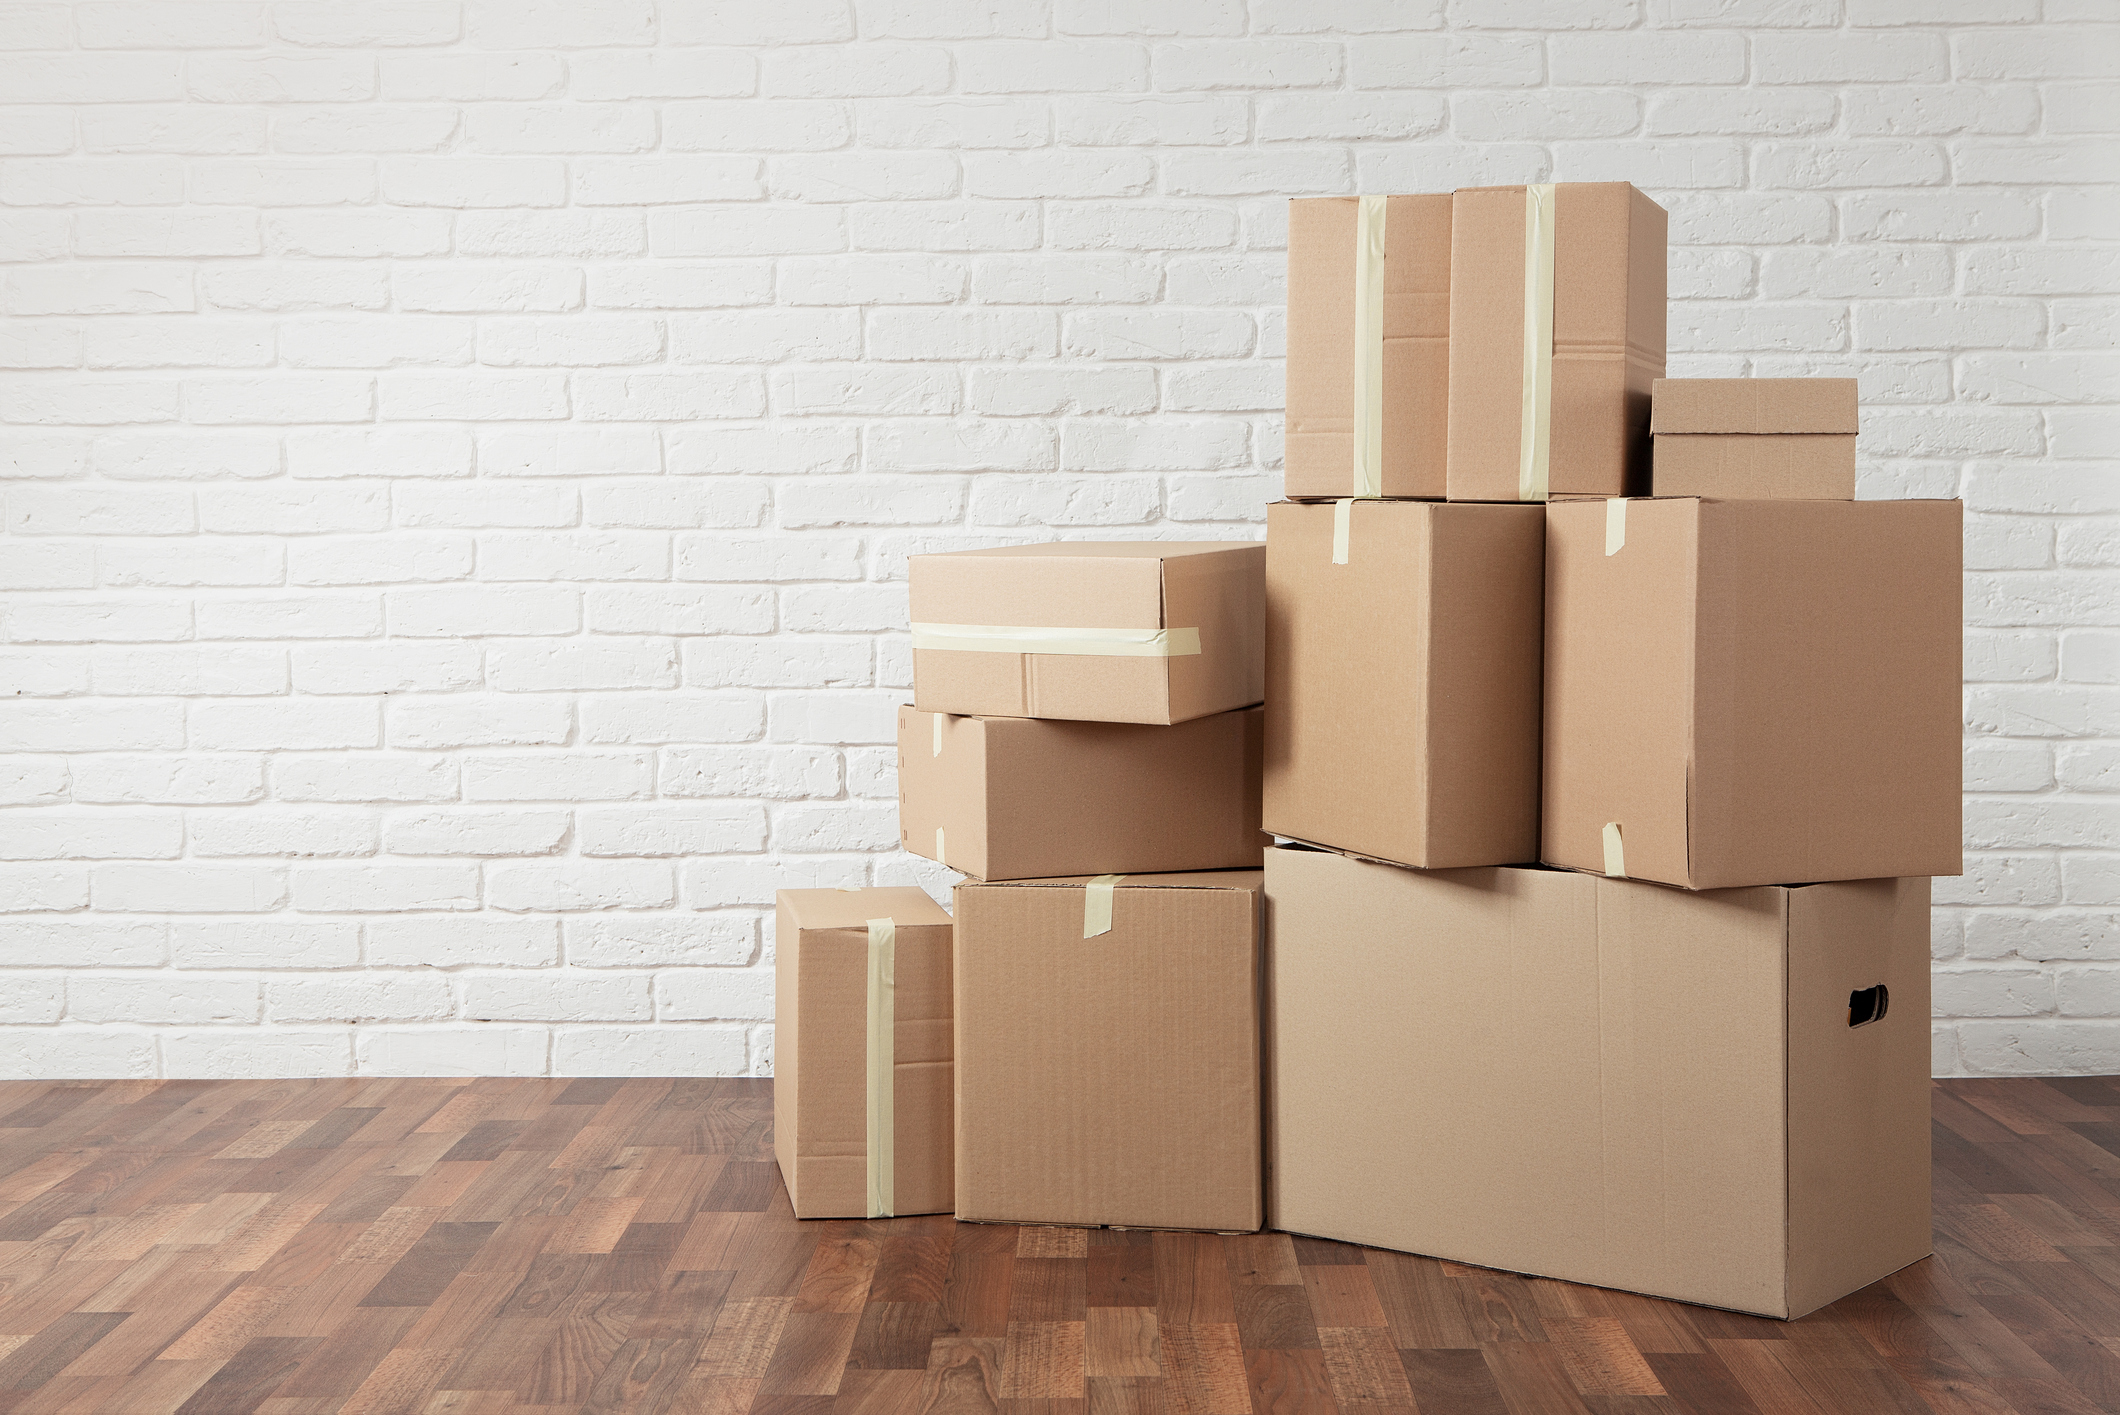 10 Places to Find Free Moving Boxes - The SpareFoot Blog